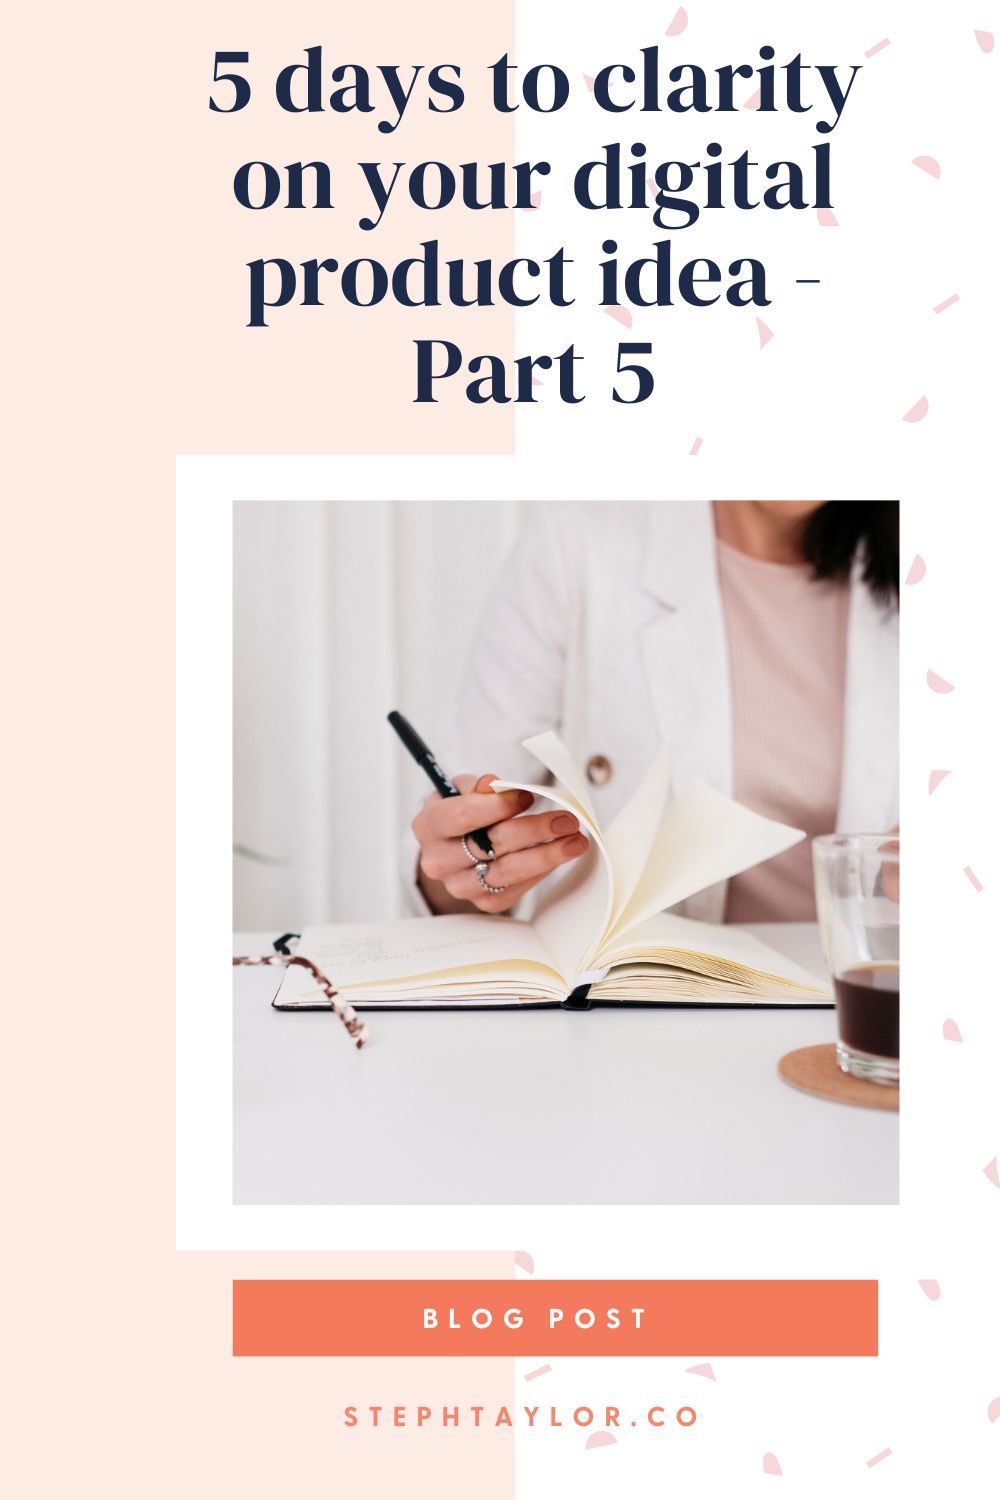 5 days to clarity on your digital product idea – Part 5